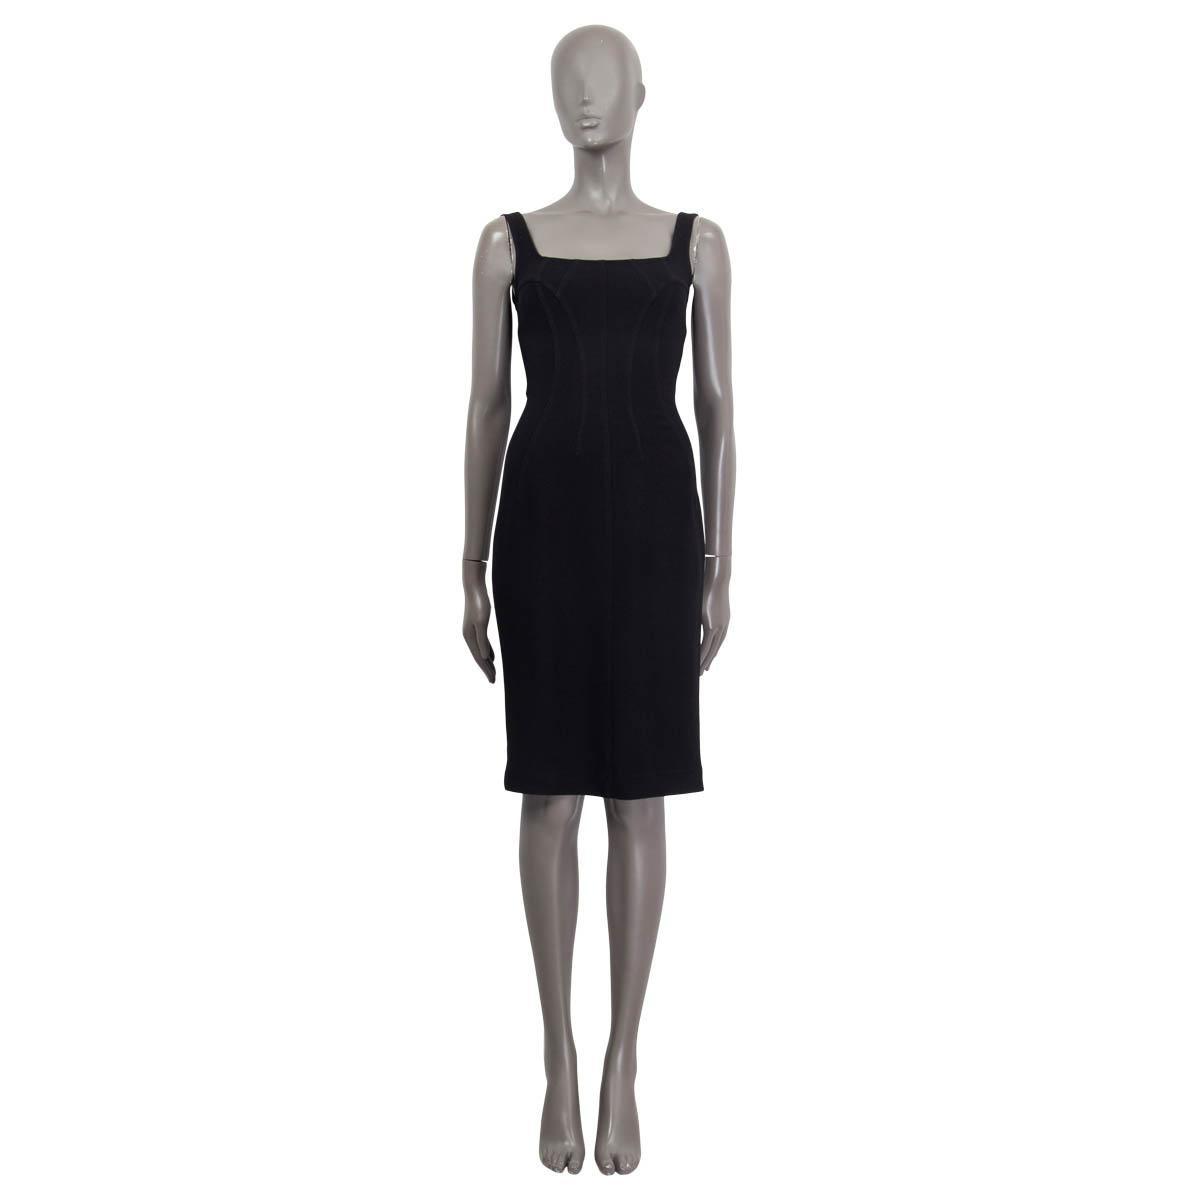 100% authentic Dolce & Gabbana sleeveless sheath dress in black viscose (51%) and acetate (49%). Opens with a concealed zipper and a hook on the back. Unlined. Has been worn and is in excellent condition.

Measurements
Tag Size	40
Size	S
Bust	72cm